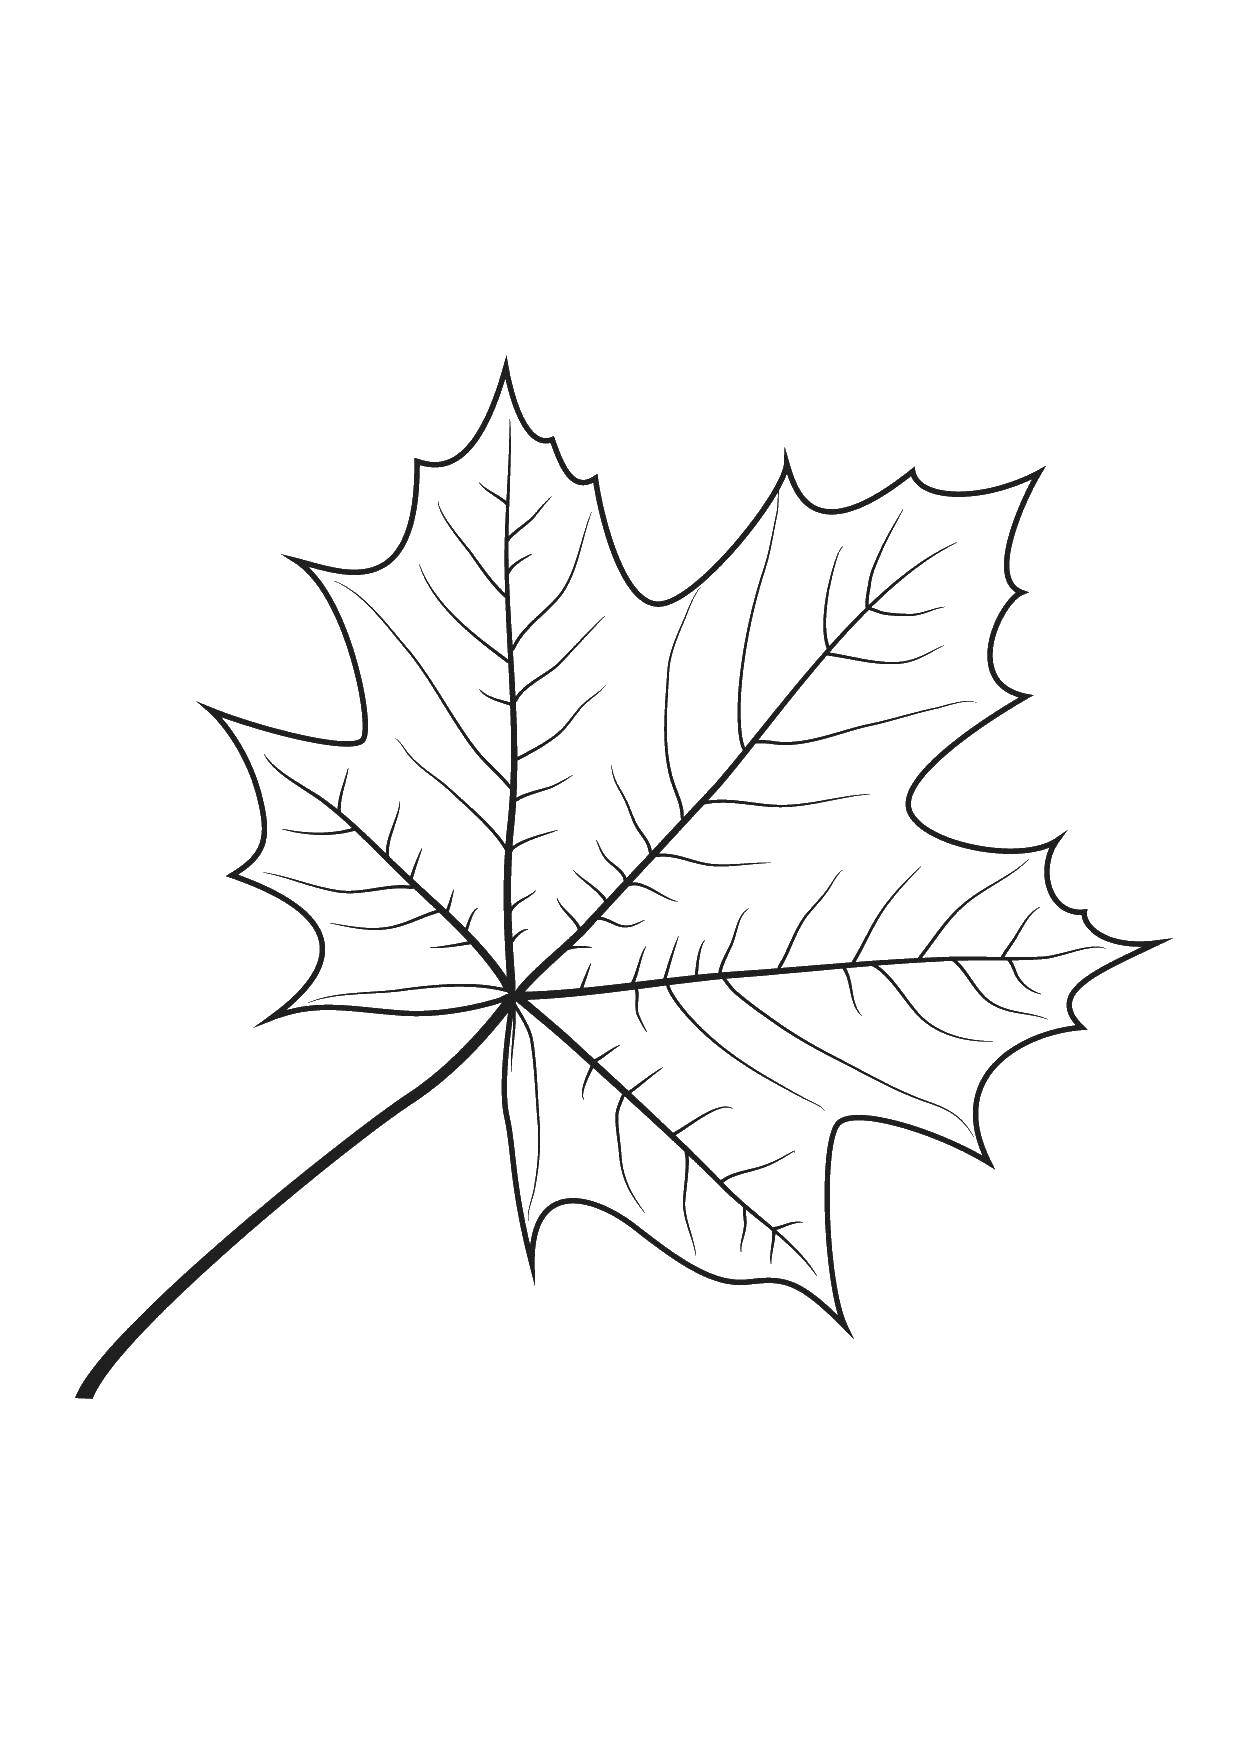 Coloring Maple leaves. Category The contours of the leaves. Tags:  leaf.